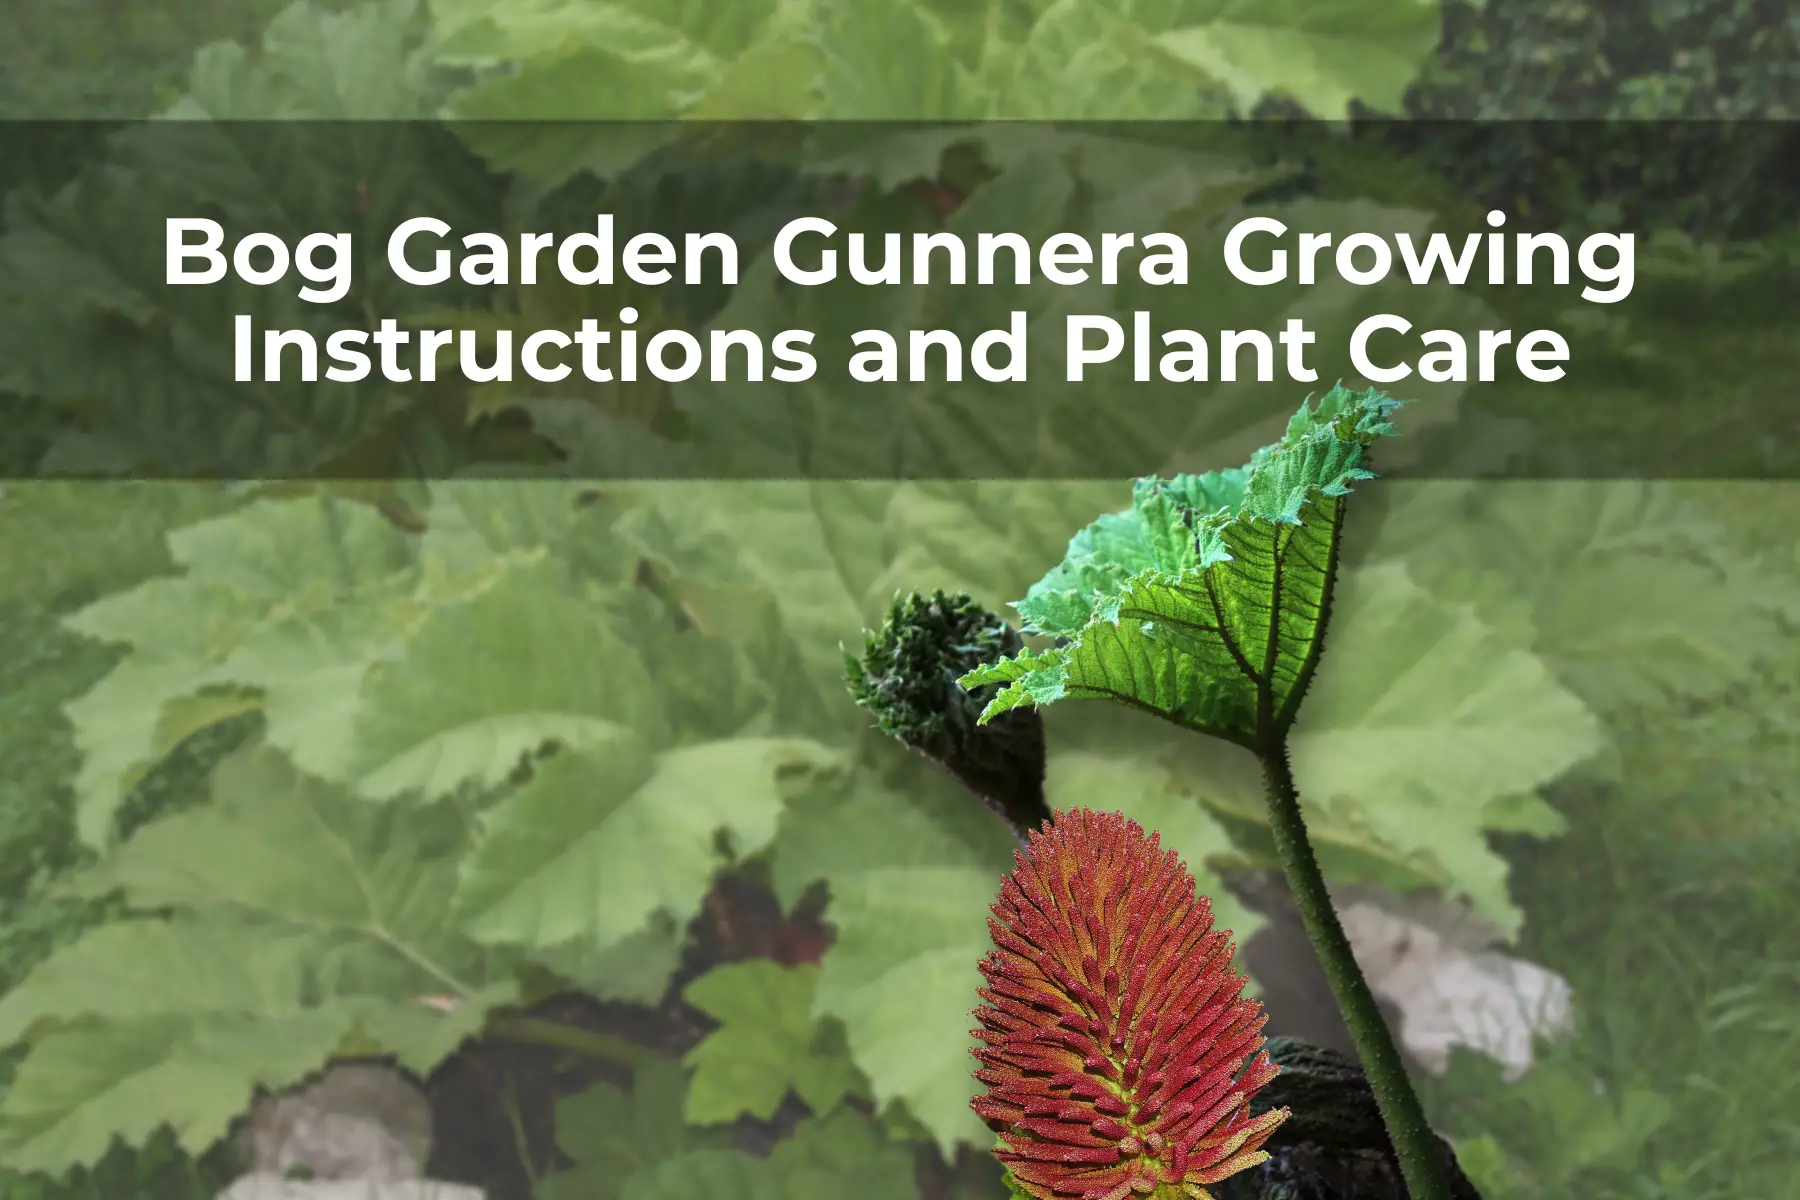 Bog Garden Gunnera Growing Instructions and Plant Care